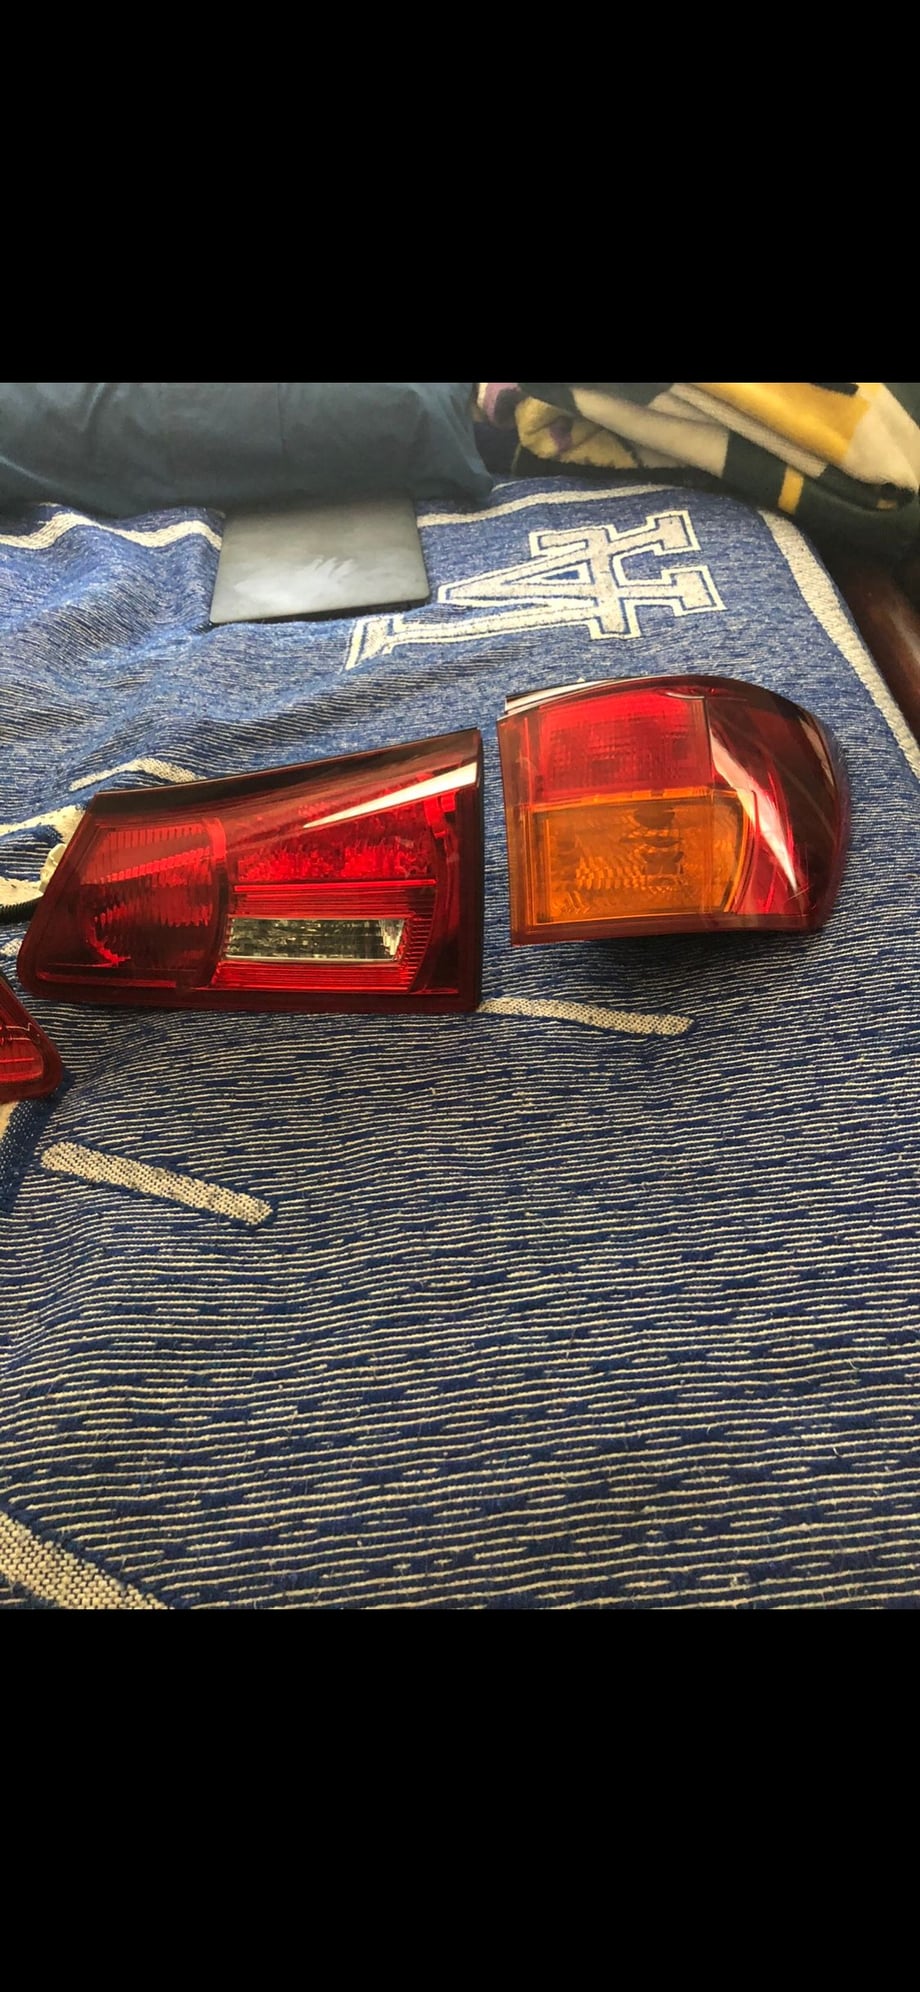 Lights - Rear Tailights - Used - 2006 to 2013 Lexus IS250 - 2006 to 2013 Lexus IS350 - 2008 to 2014 Lexus IS F - Los Angeles, CA 90241, United States